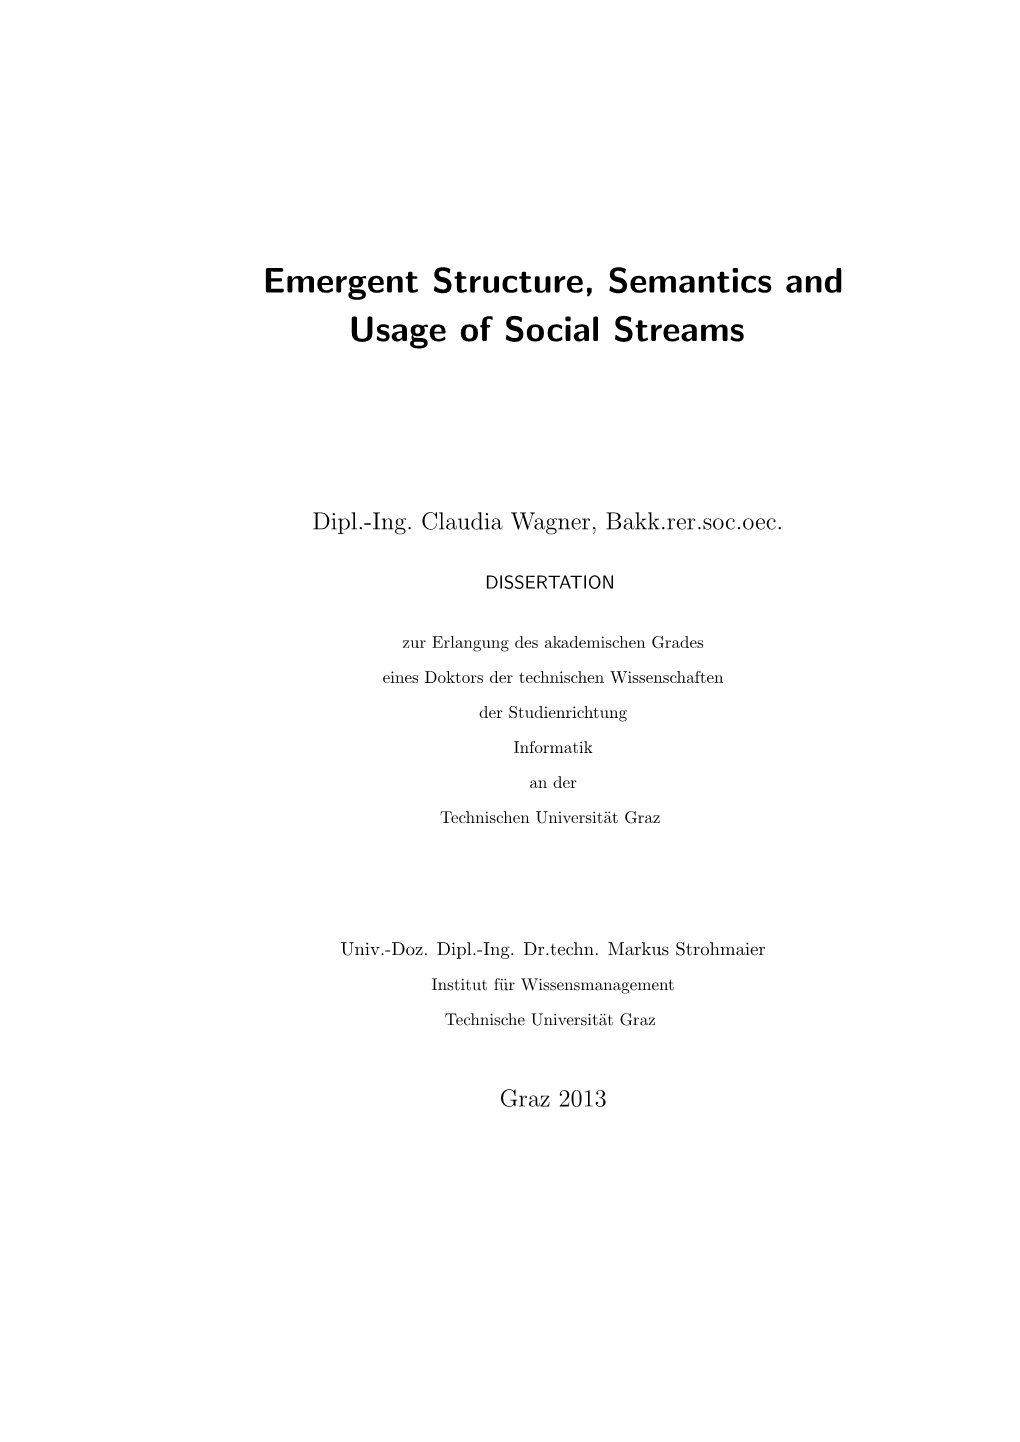 Emergent Structure, Semantics and Usage of Social Streams